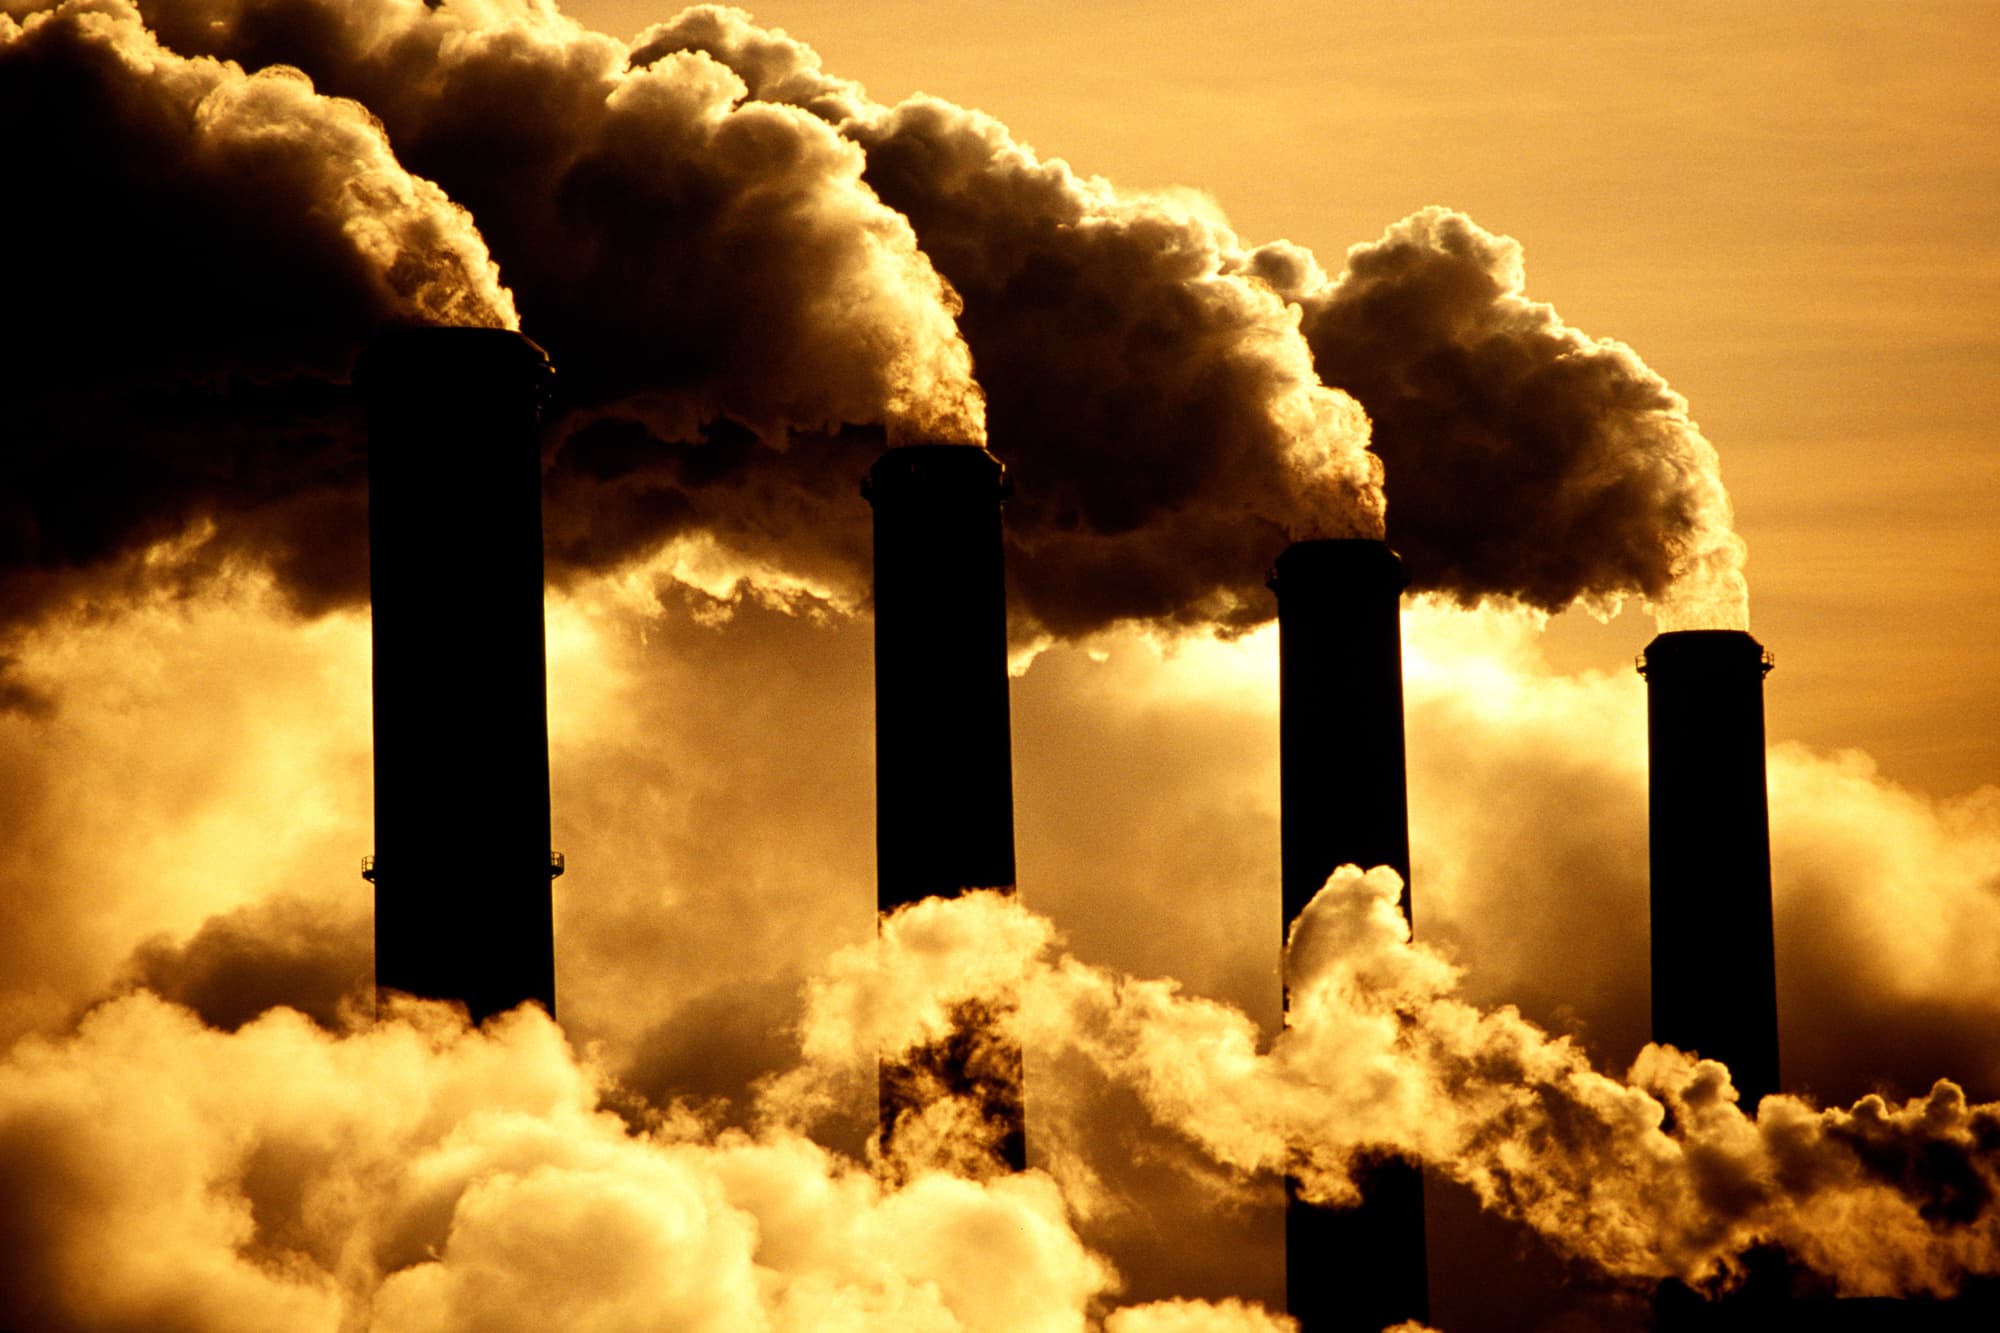 Carbon offsets are imperfect but necessary and the market needs to grow fast, says B of A exec